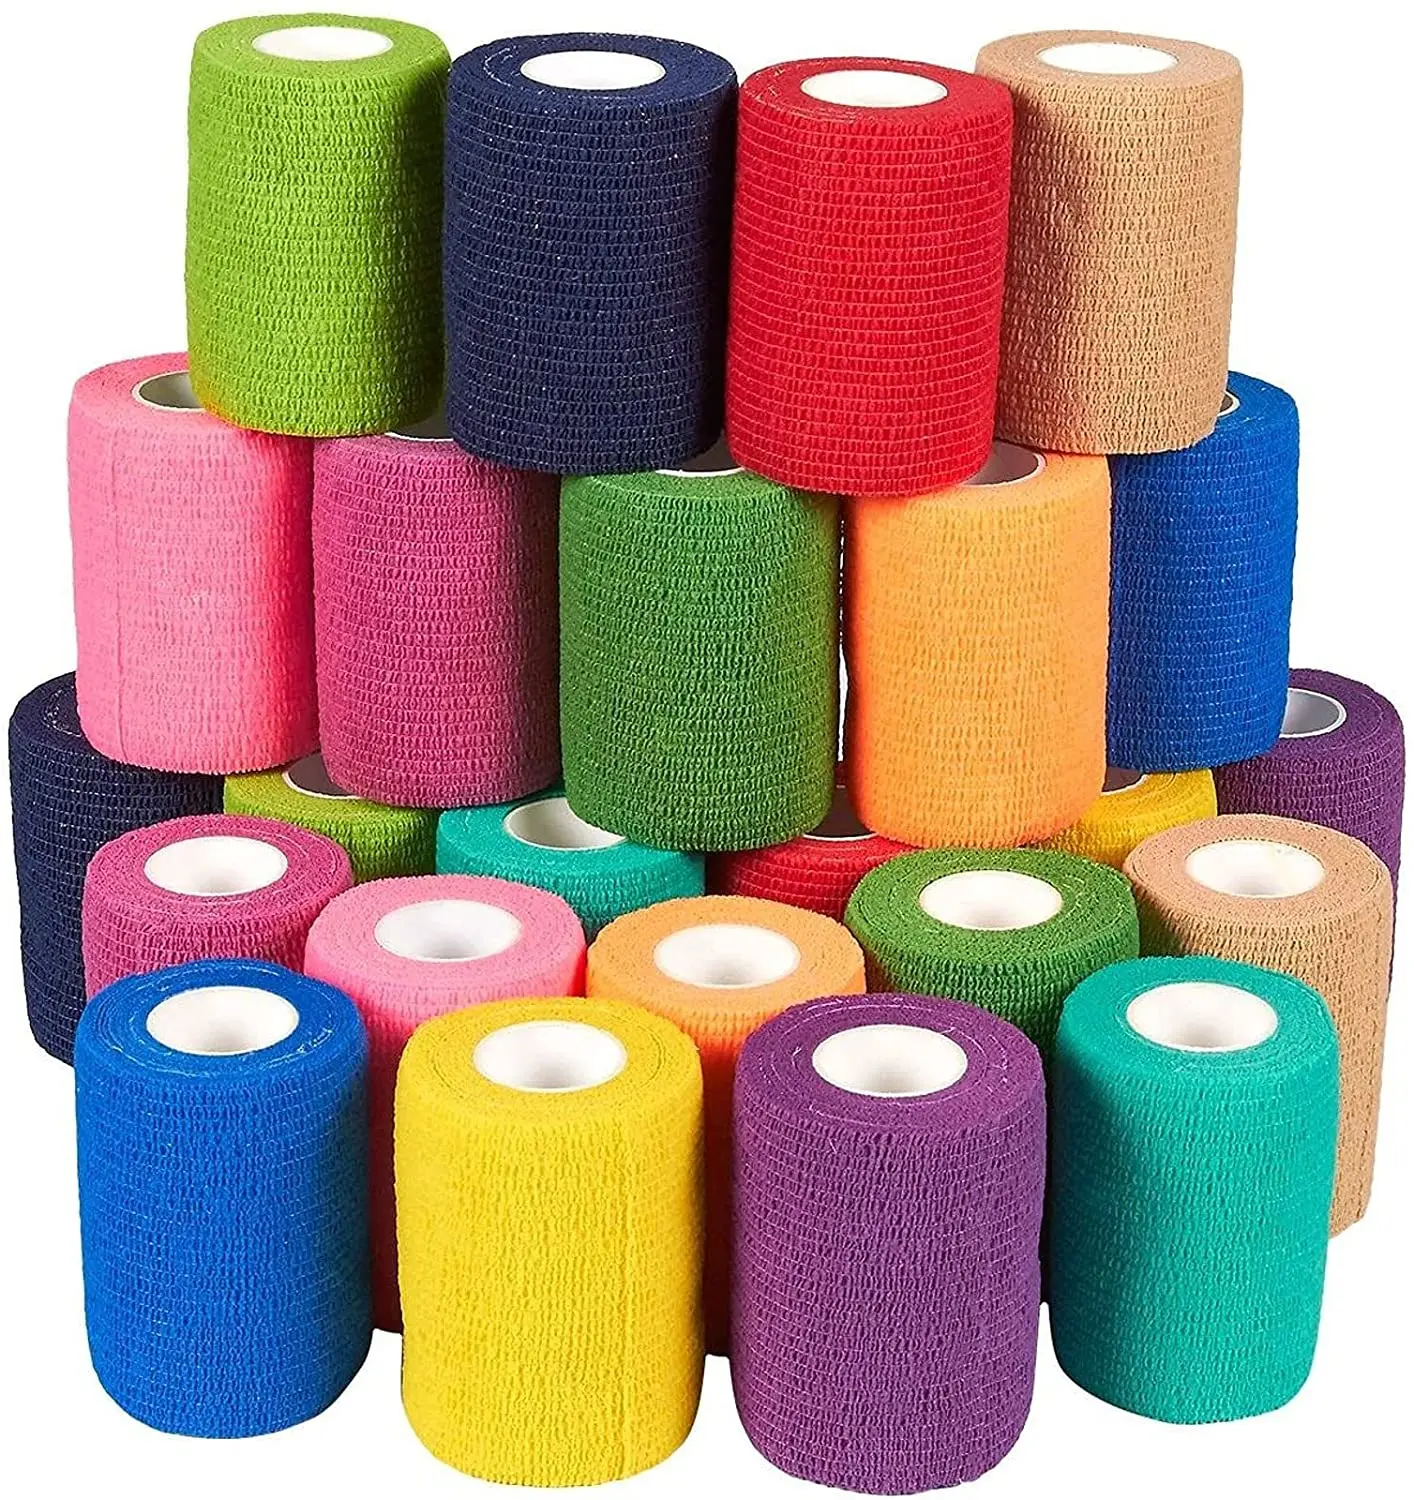 

24 Pack 7.5cm Cohesive Bandage Wrap Rolls Elastic Self-Adherent Tape for Stretch Athletic, Sports, Wrist, Ankle Sprains,Swelling